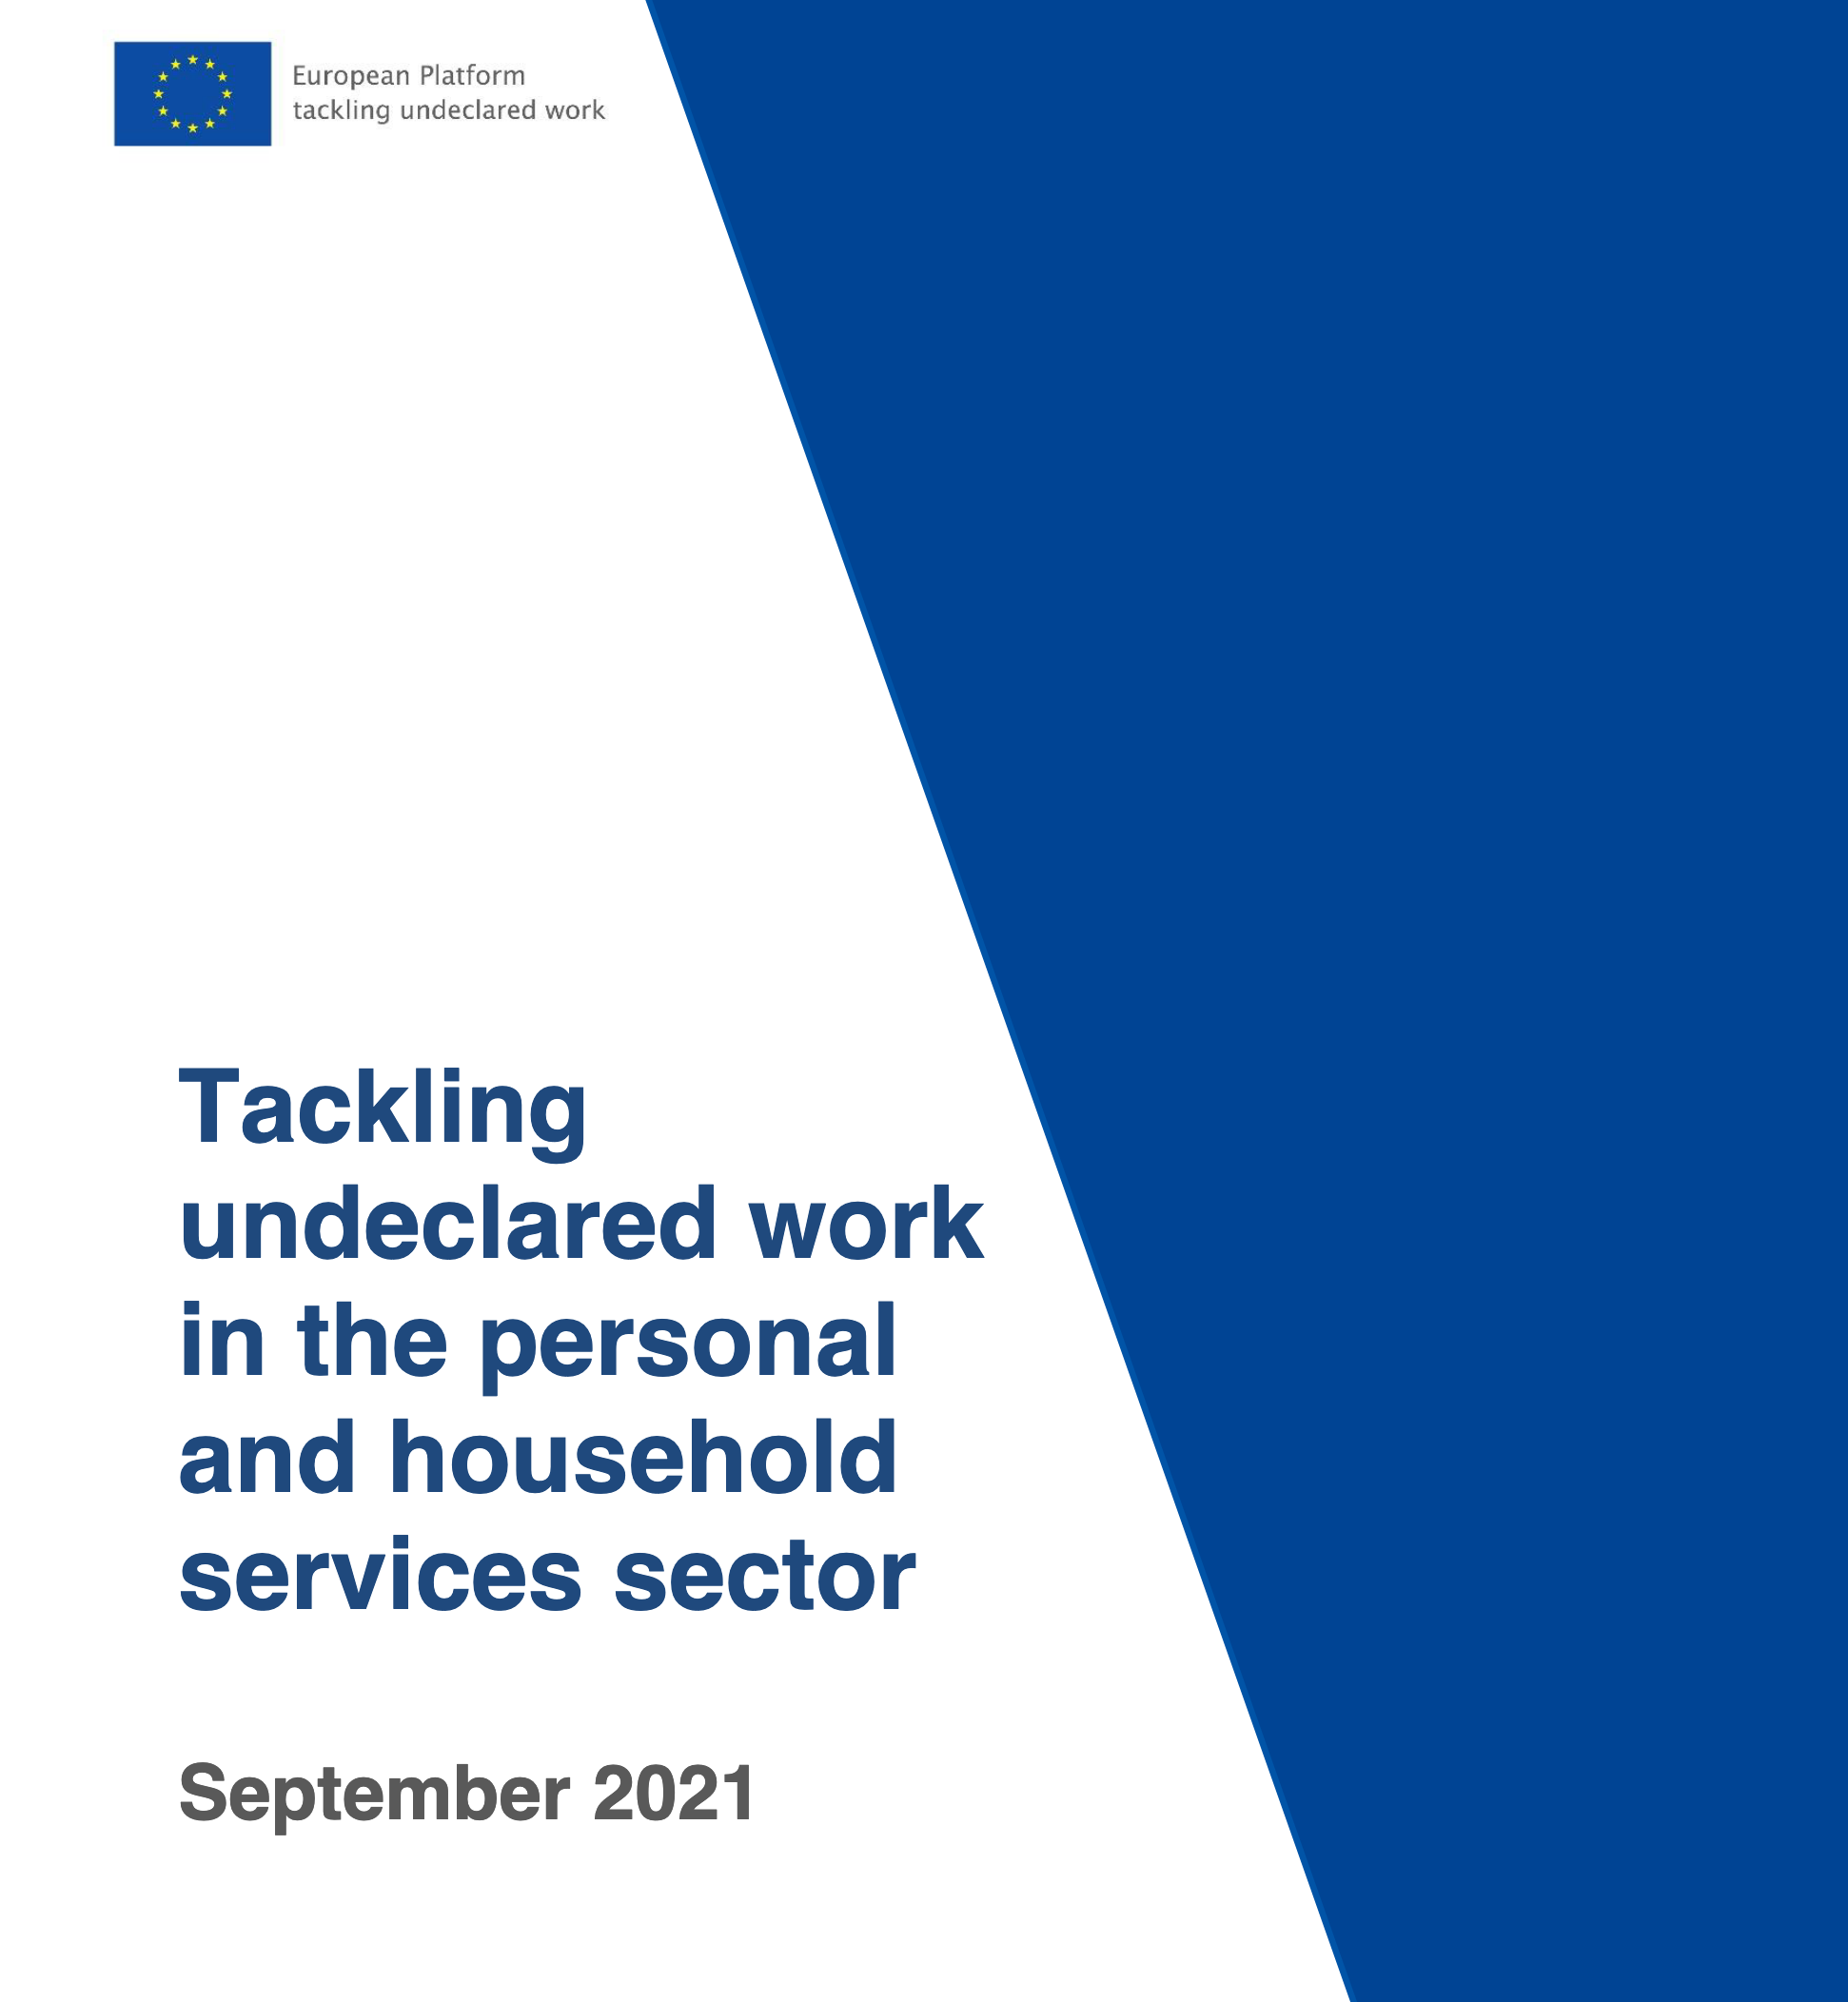 ELA report on undeclared work in the personal and household services sector released